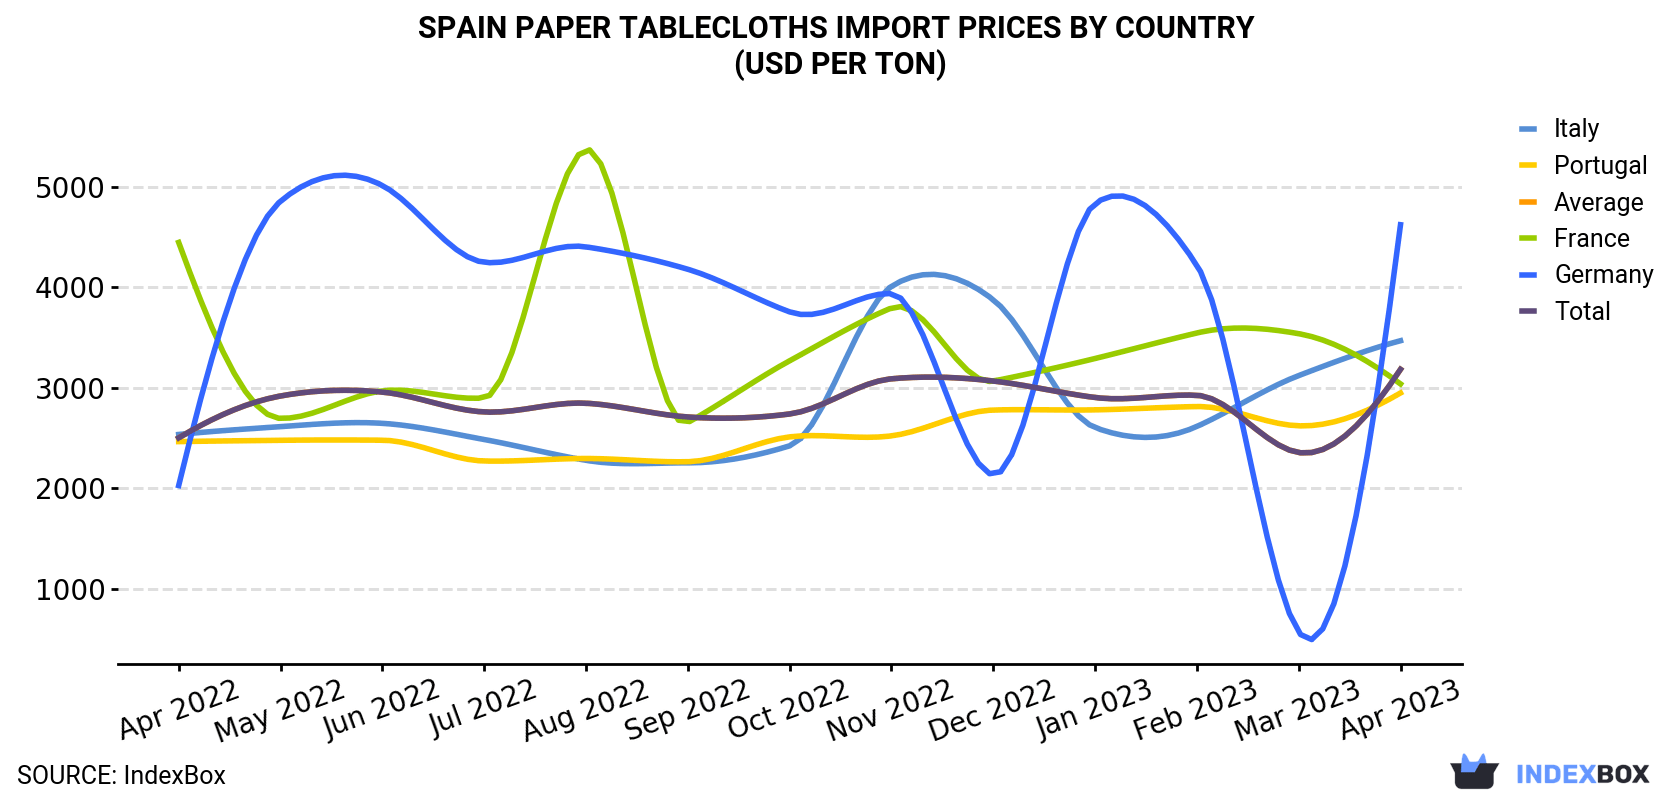 Spain Paper Tablecloths Import Prices By Country (USD Per Ton)